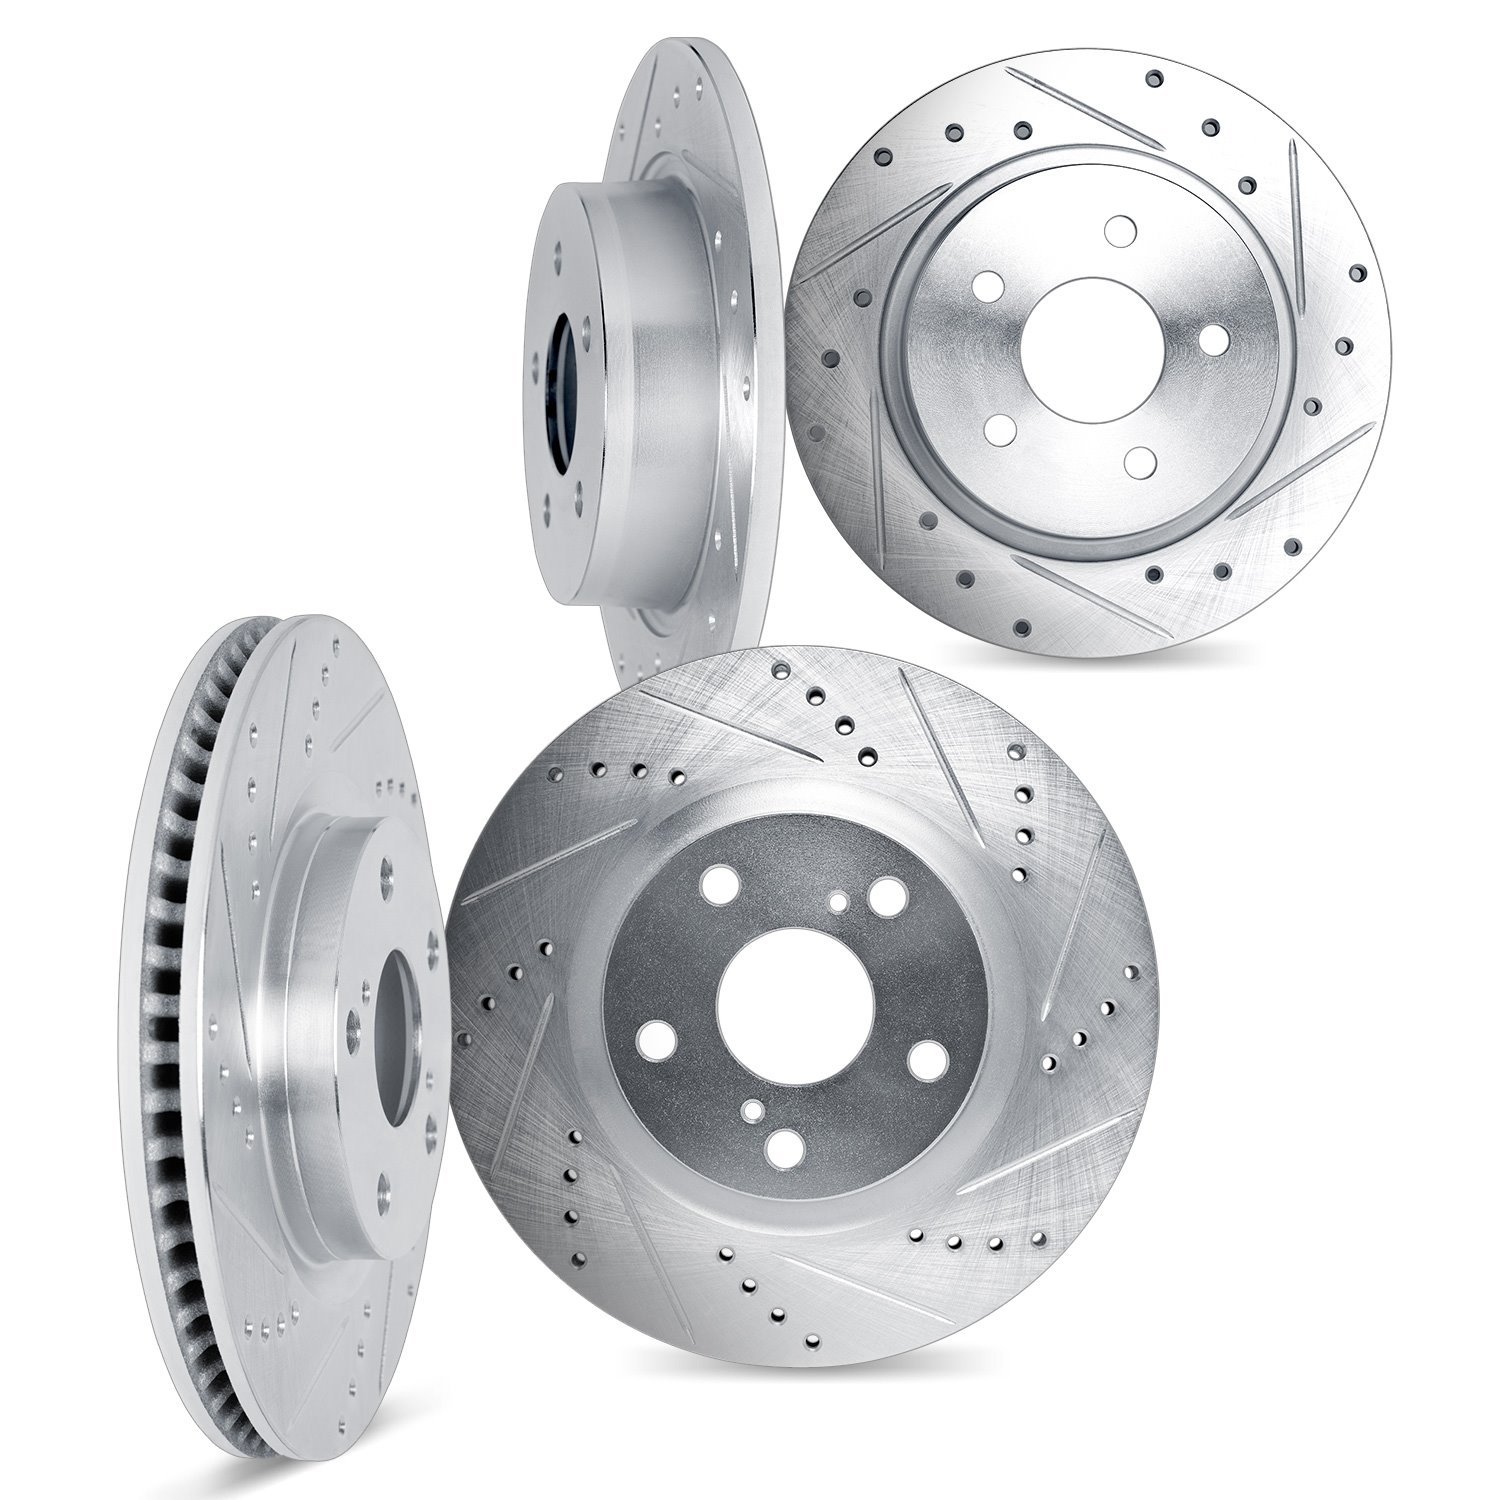 7004-42005 Drilled/Slotted Brake Rotors [Silver], Fits Select Mopar, Position: Front and Rear